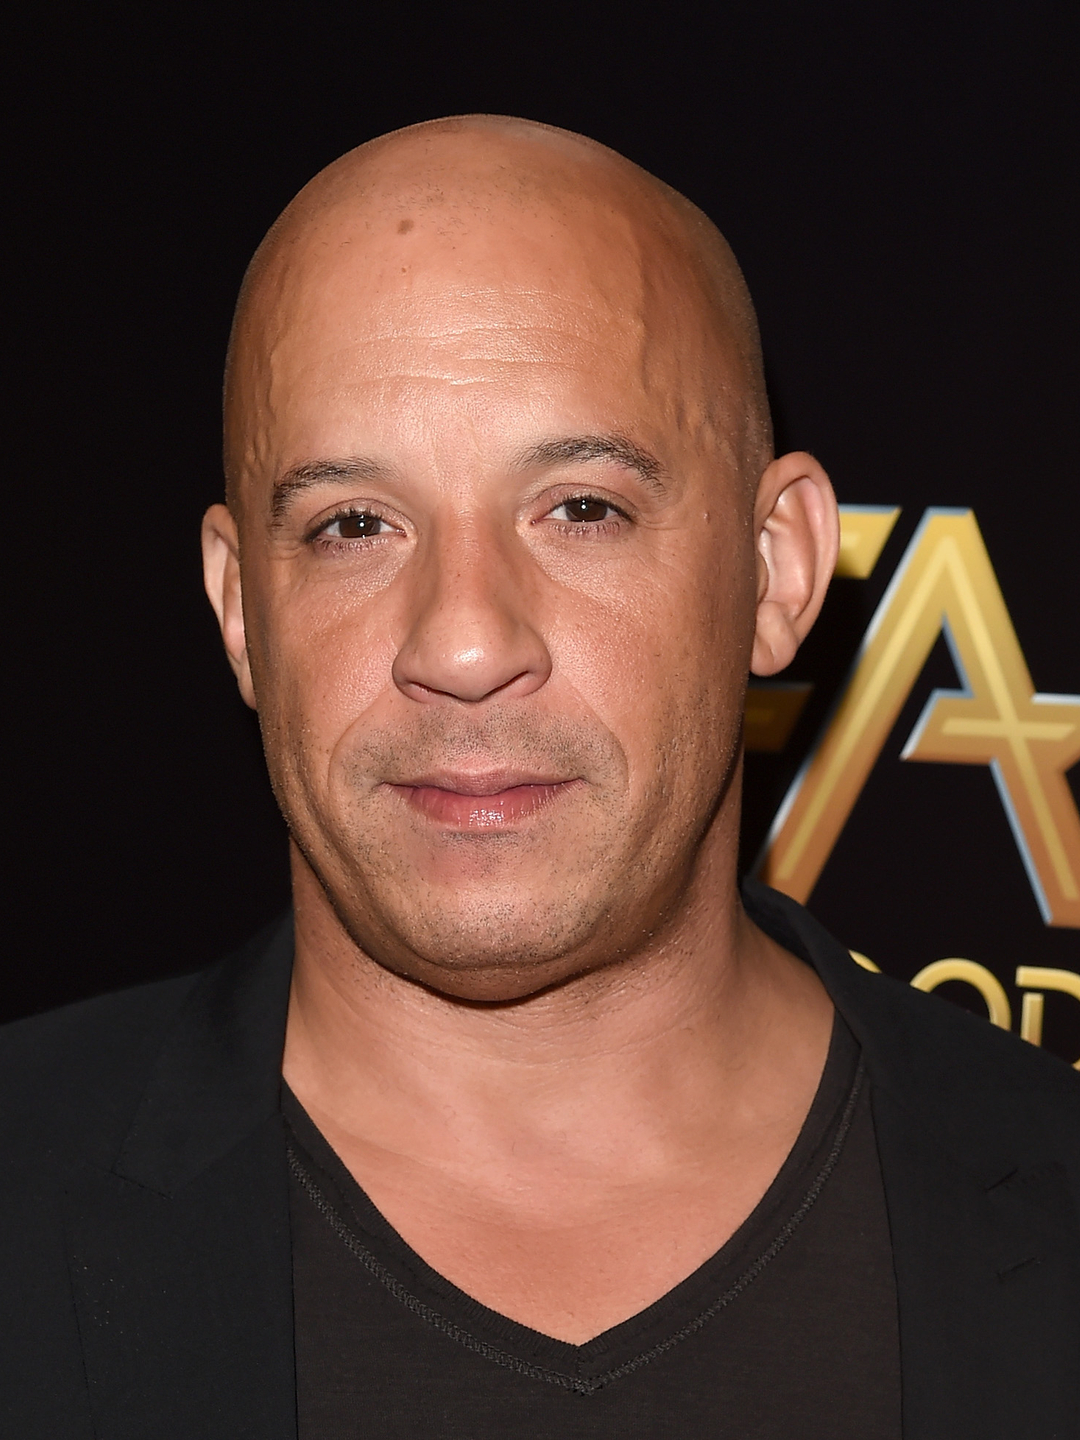 Vin Diesel who are his parents